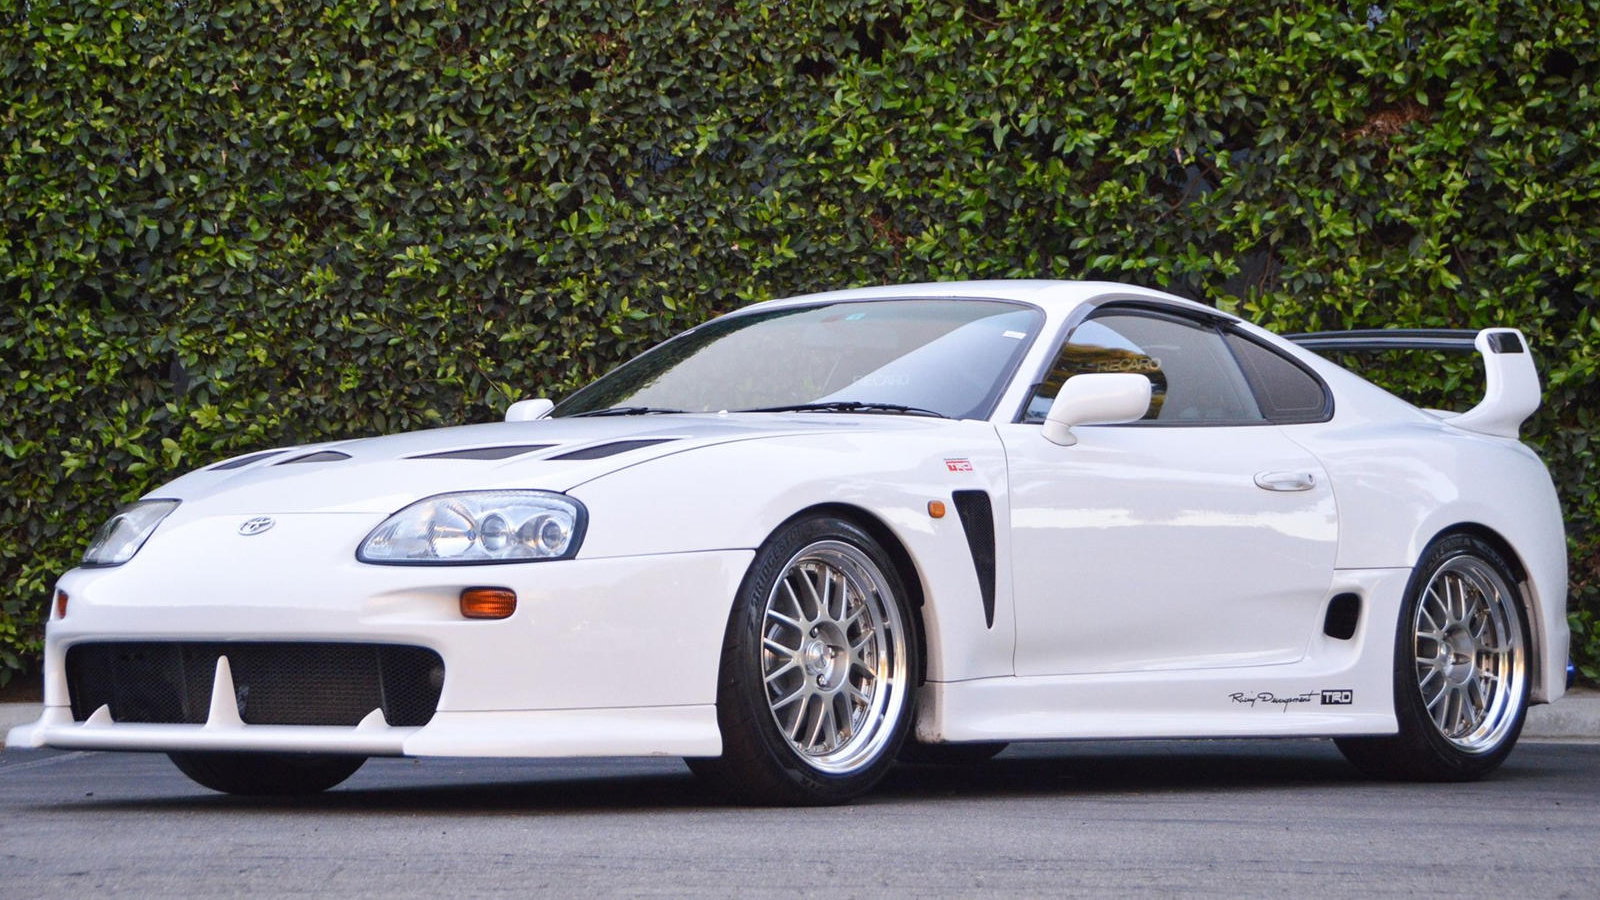 How Much Does It Cost To Import A Toyota Supra MK4 From Japan?